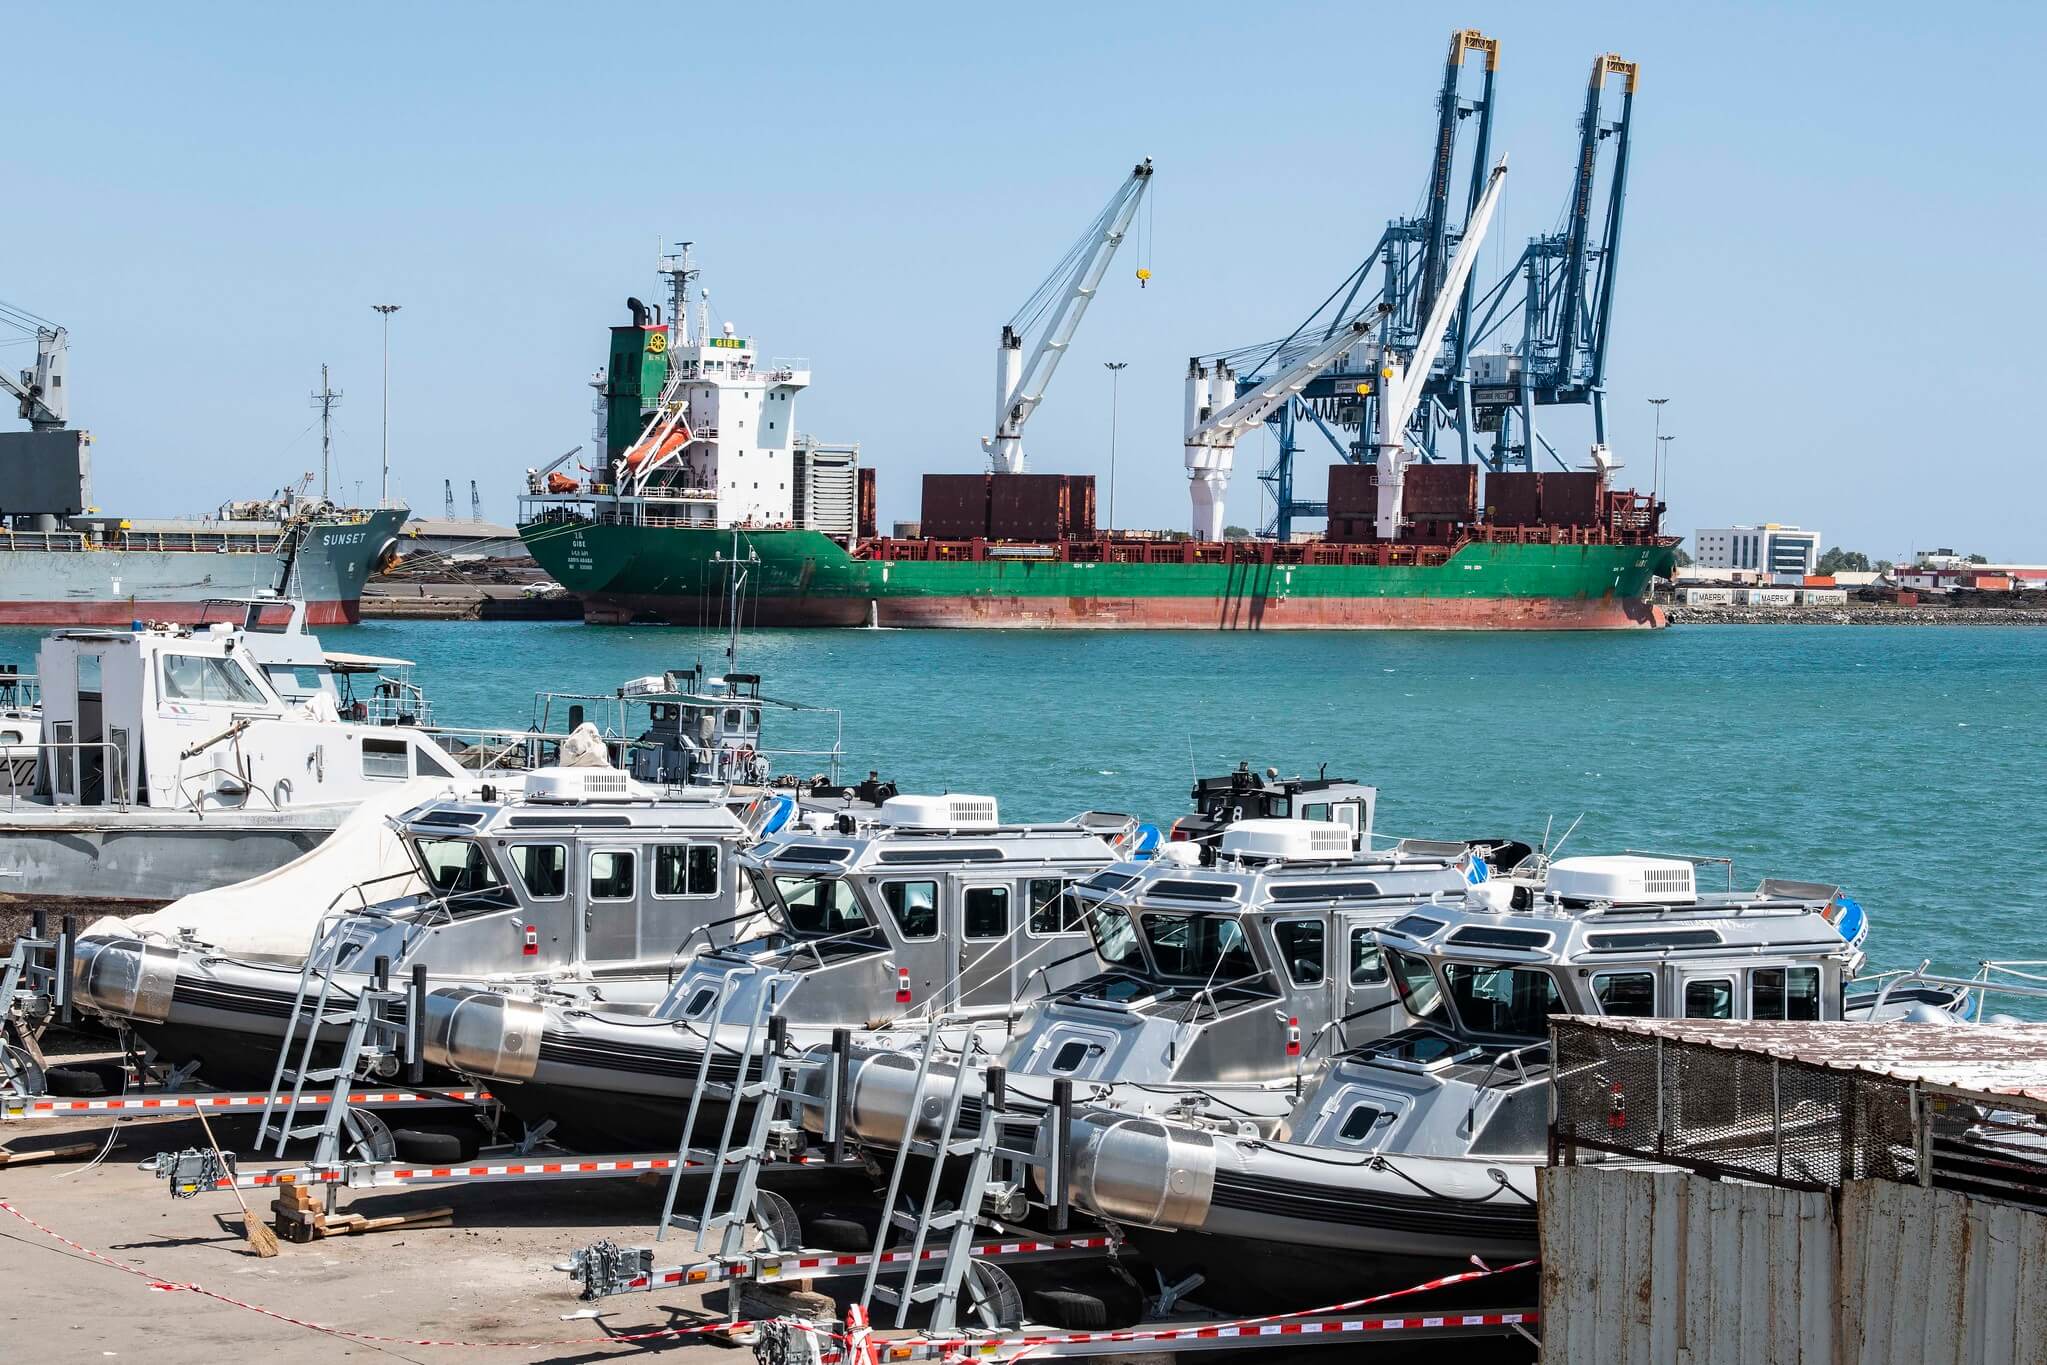 Four Defender patrol boats arrived in port at Djibouti City, Djibouti, in 2020 as part of a train-and-equip partnership between the U.S. Department of State and the Djiboutian military. © US Africa Command - Flickr